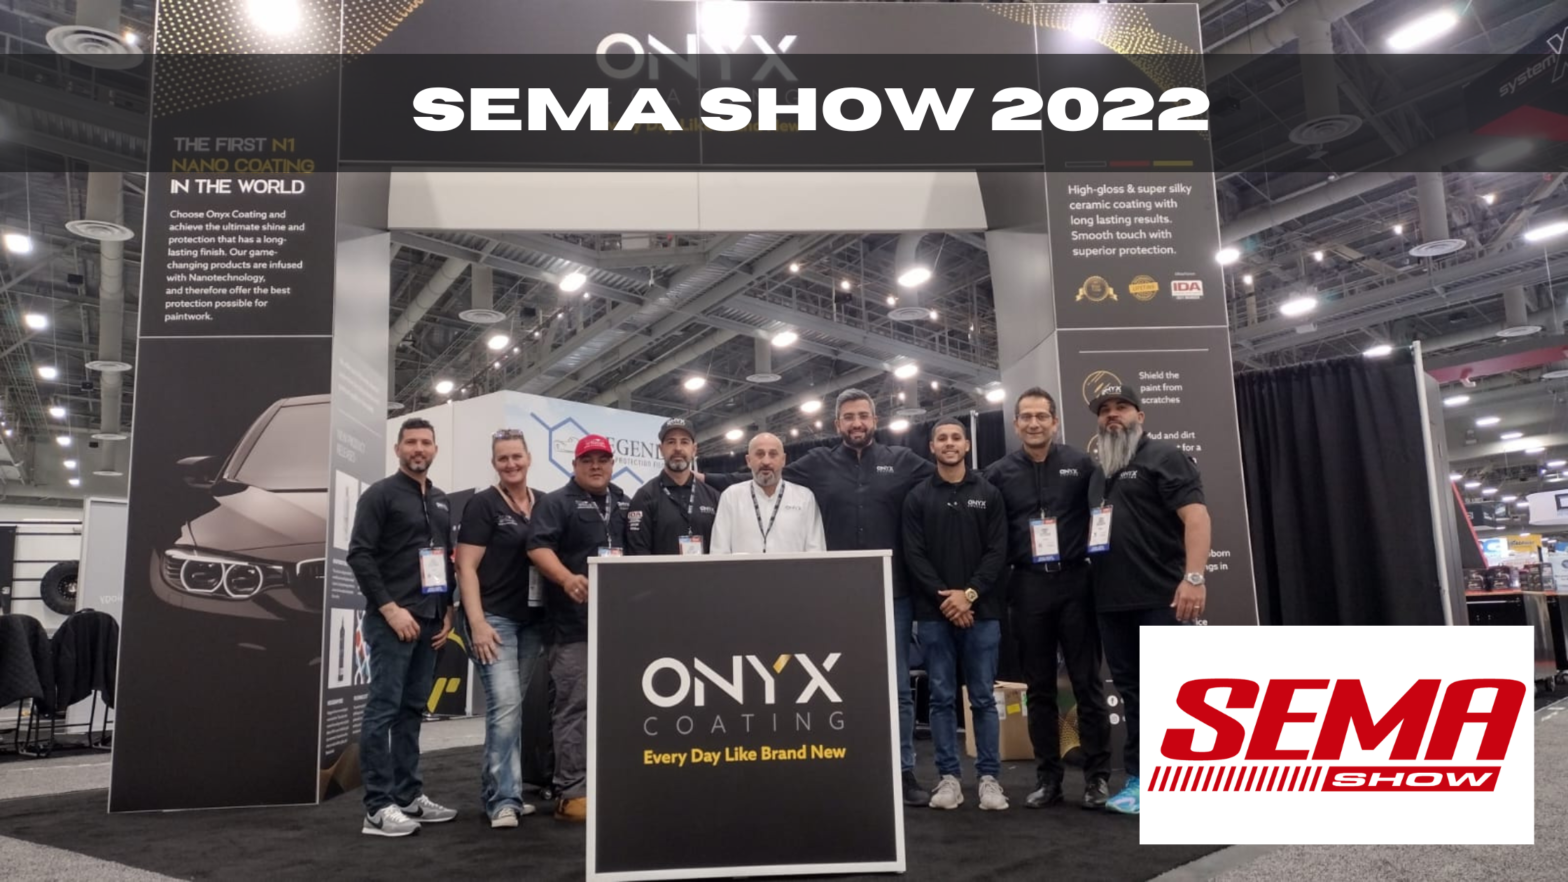 Onyx Coatings attends the Sema show 2022